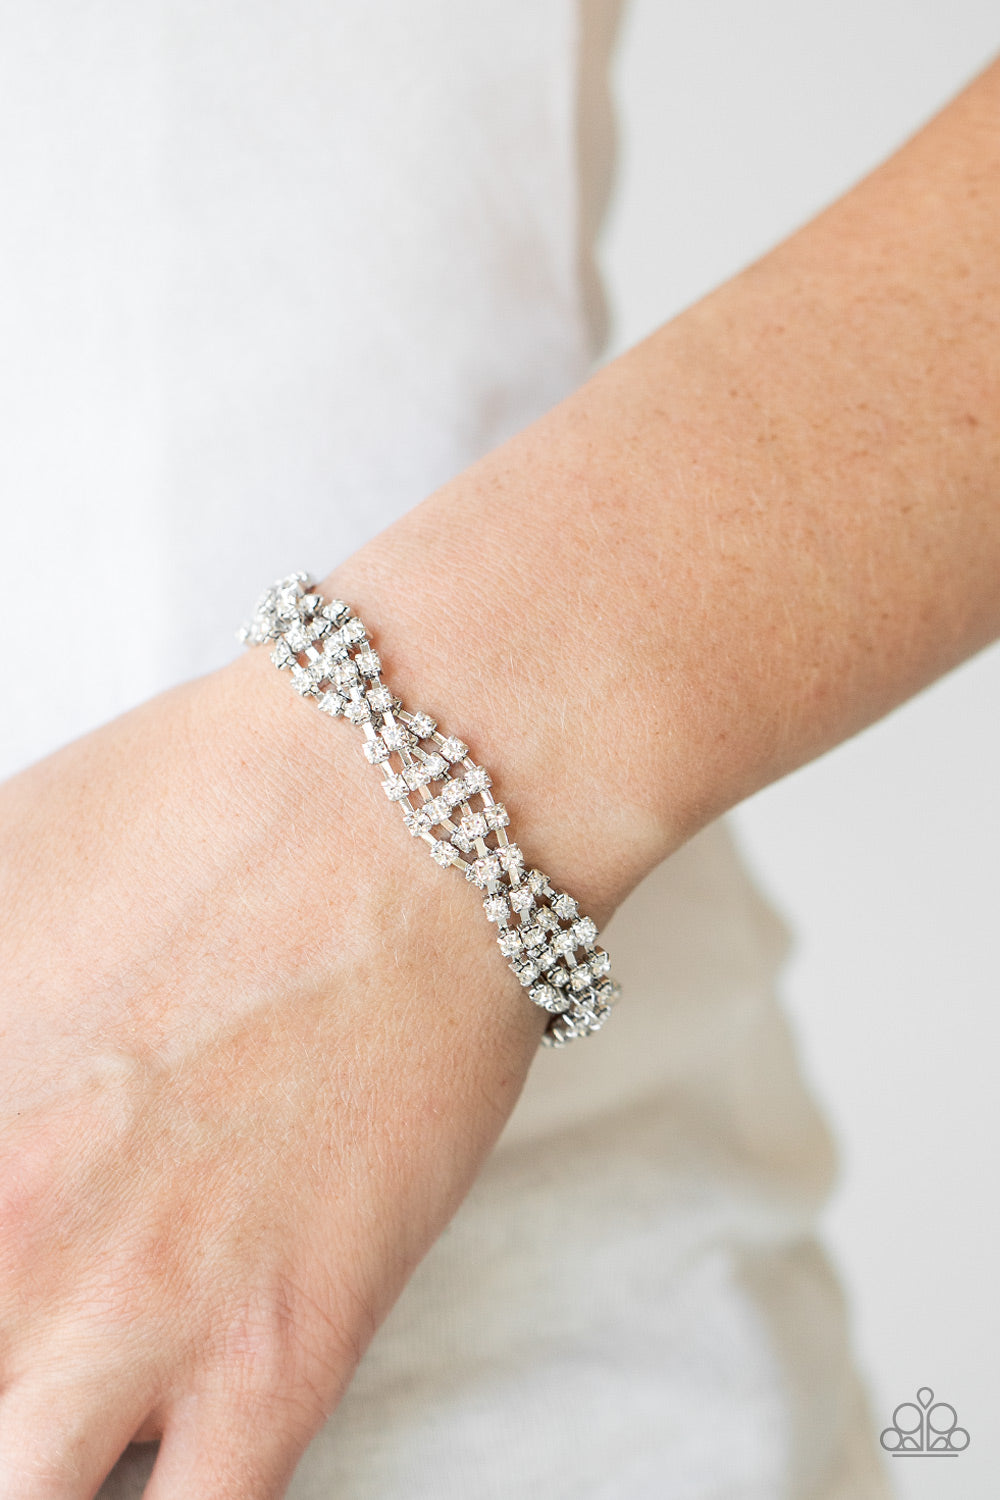 Twists and Turns White Bracelet